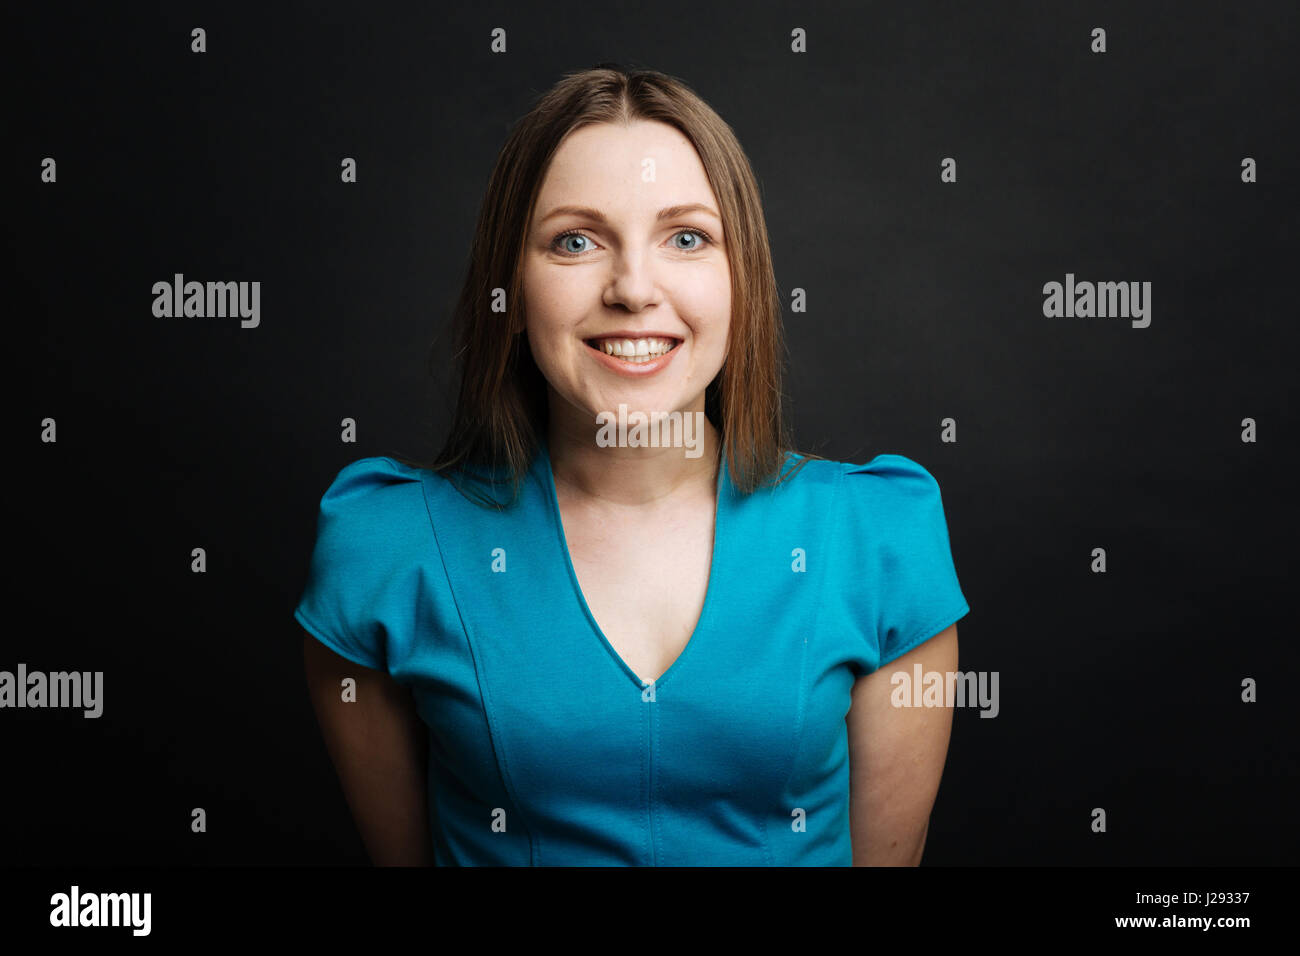 Cheerful young woman smiling in the black colored studio Stock Photo